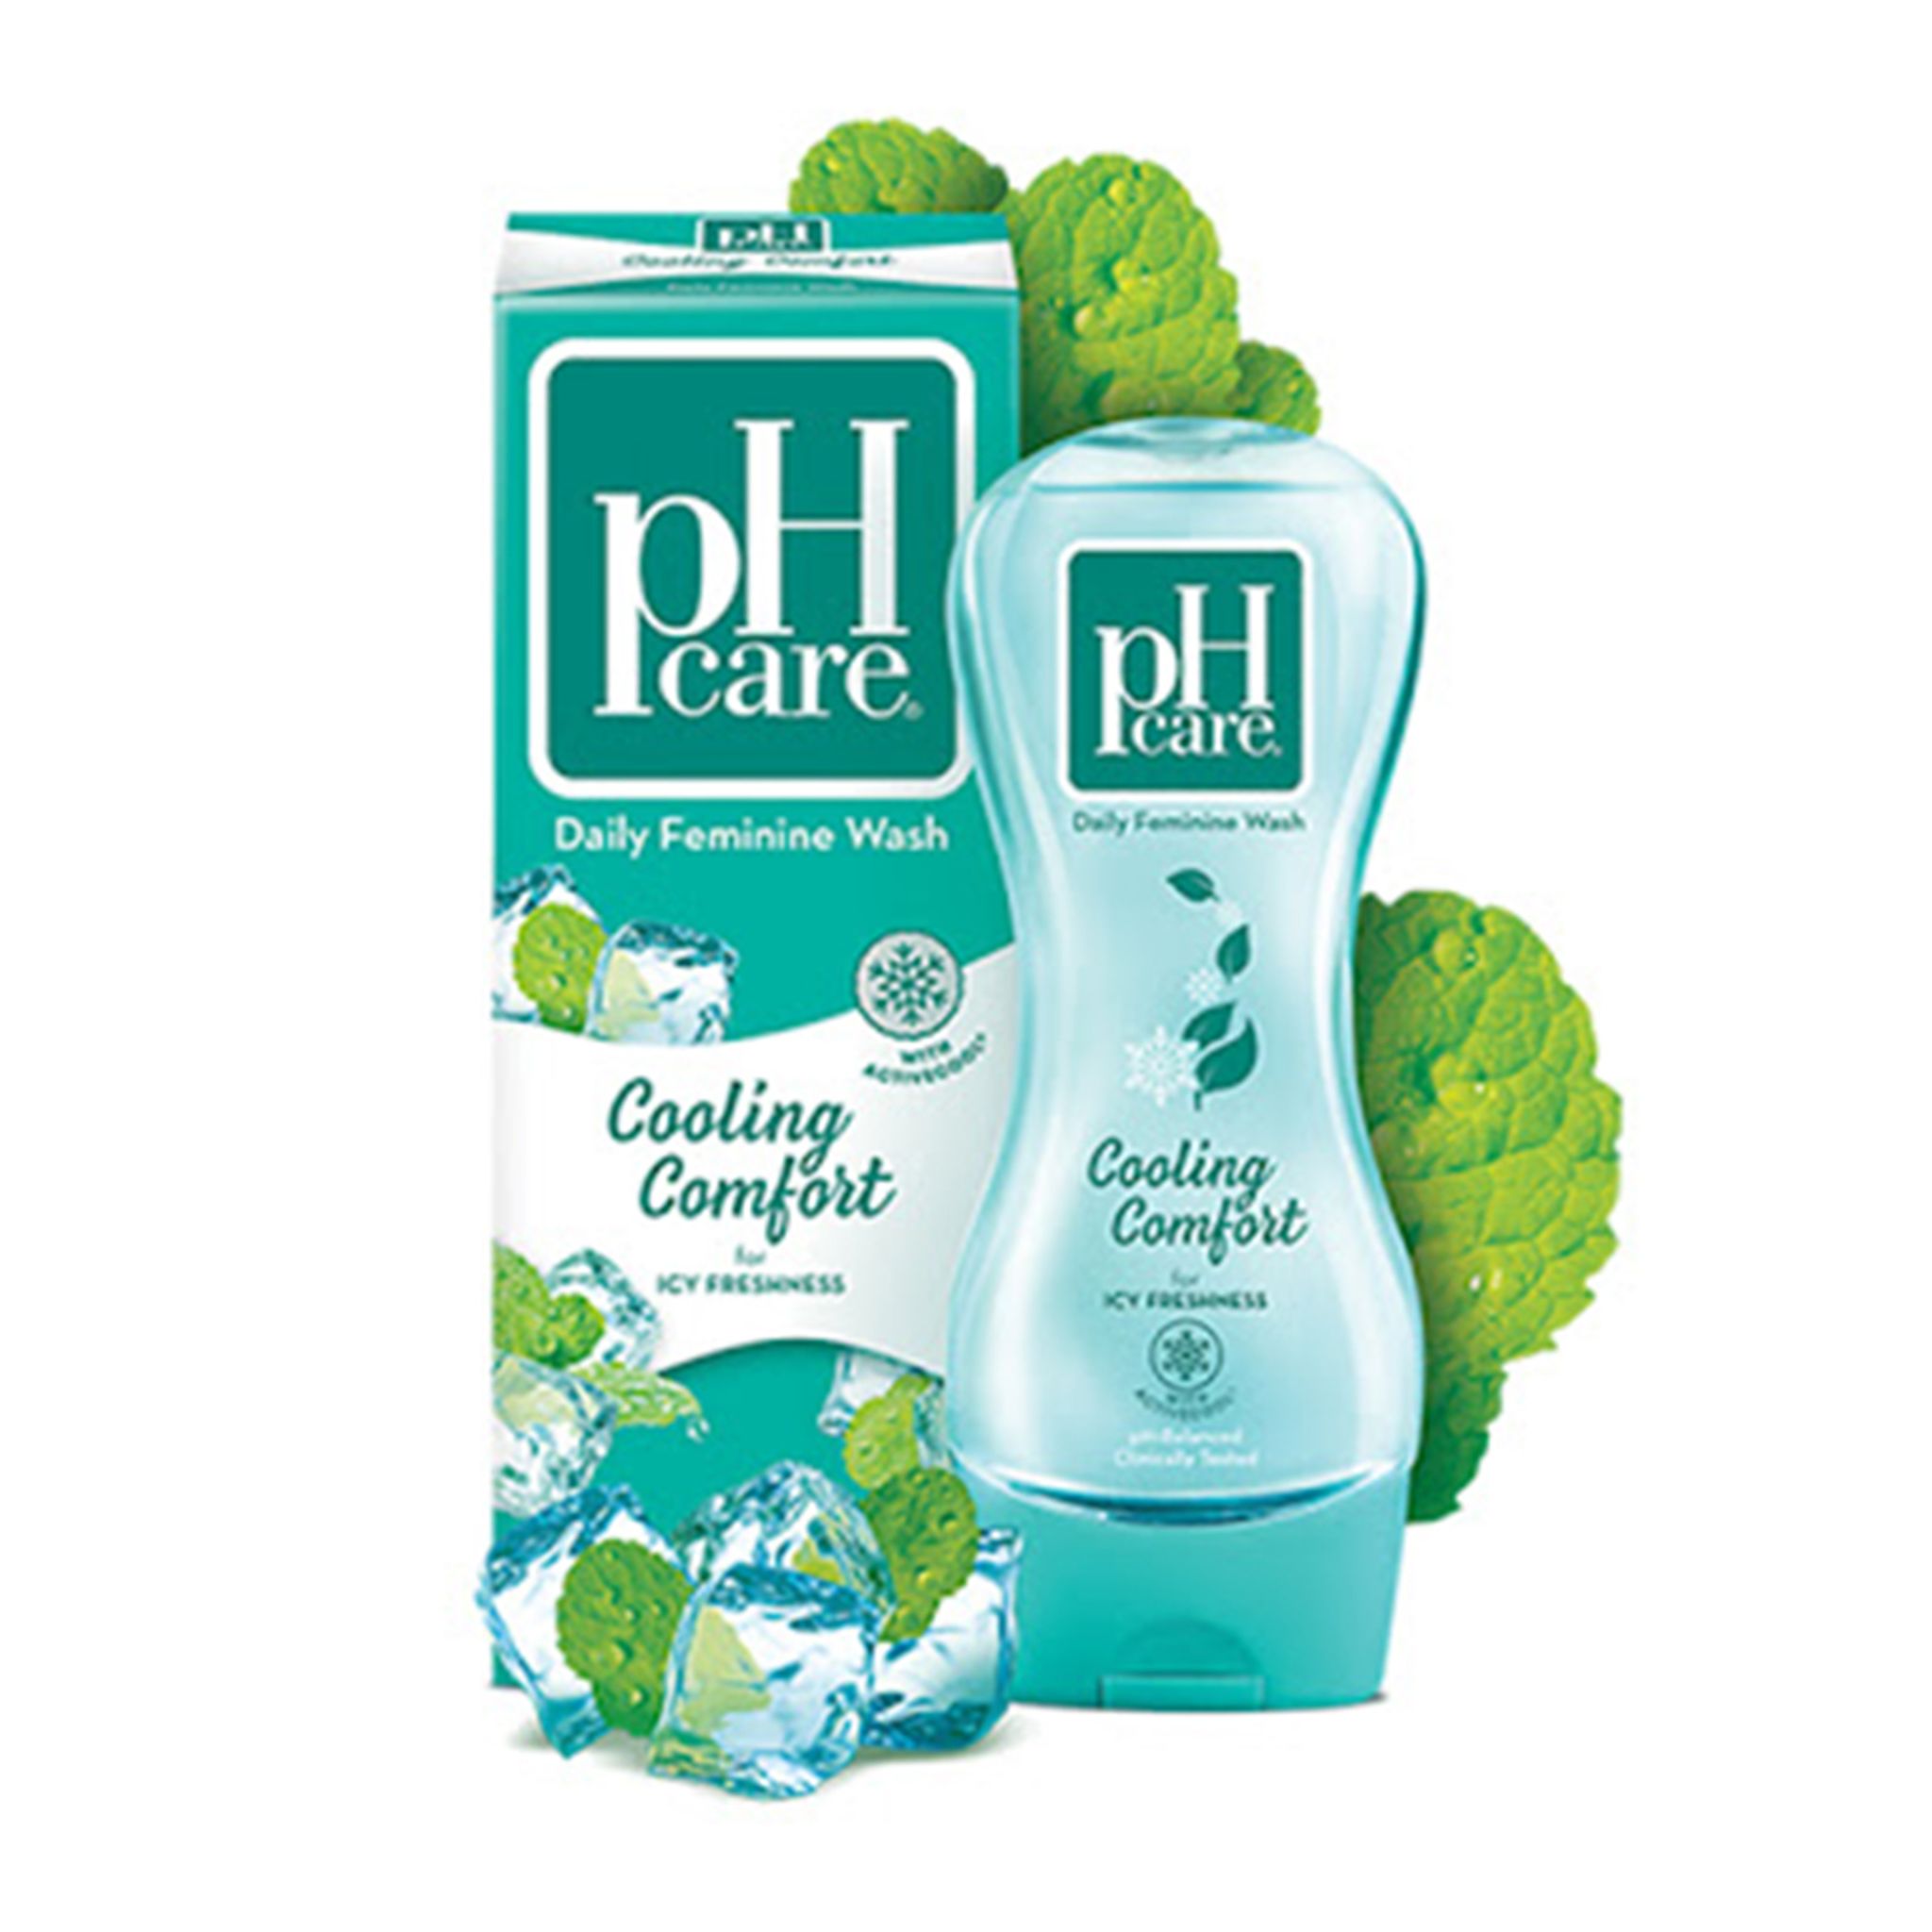 Ph Care Daily Feminine Wash Cooling Comfort 150ml - 1Sell